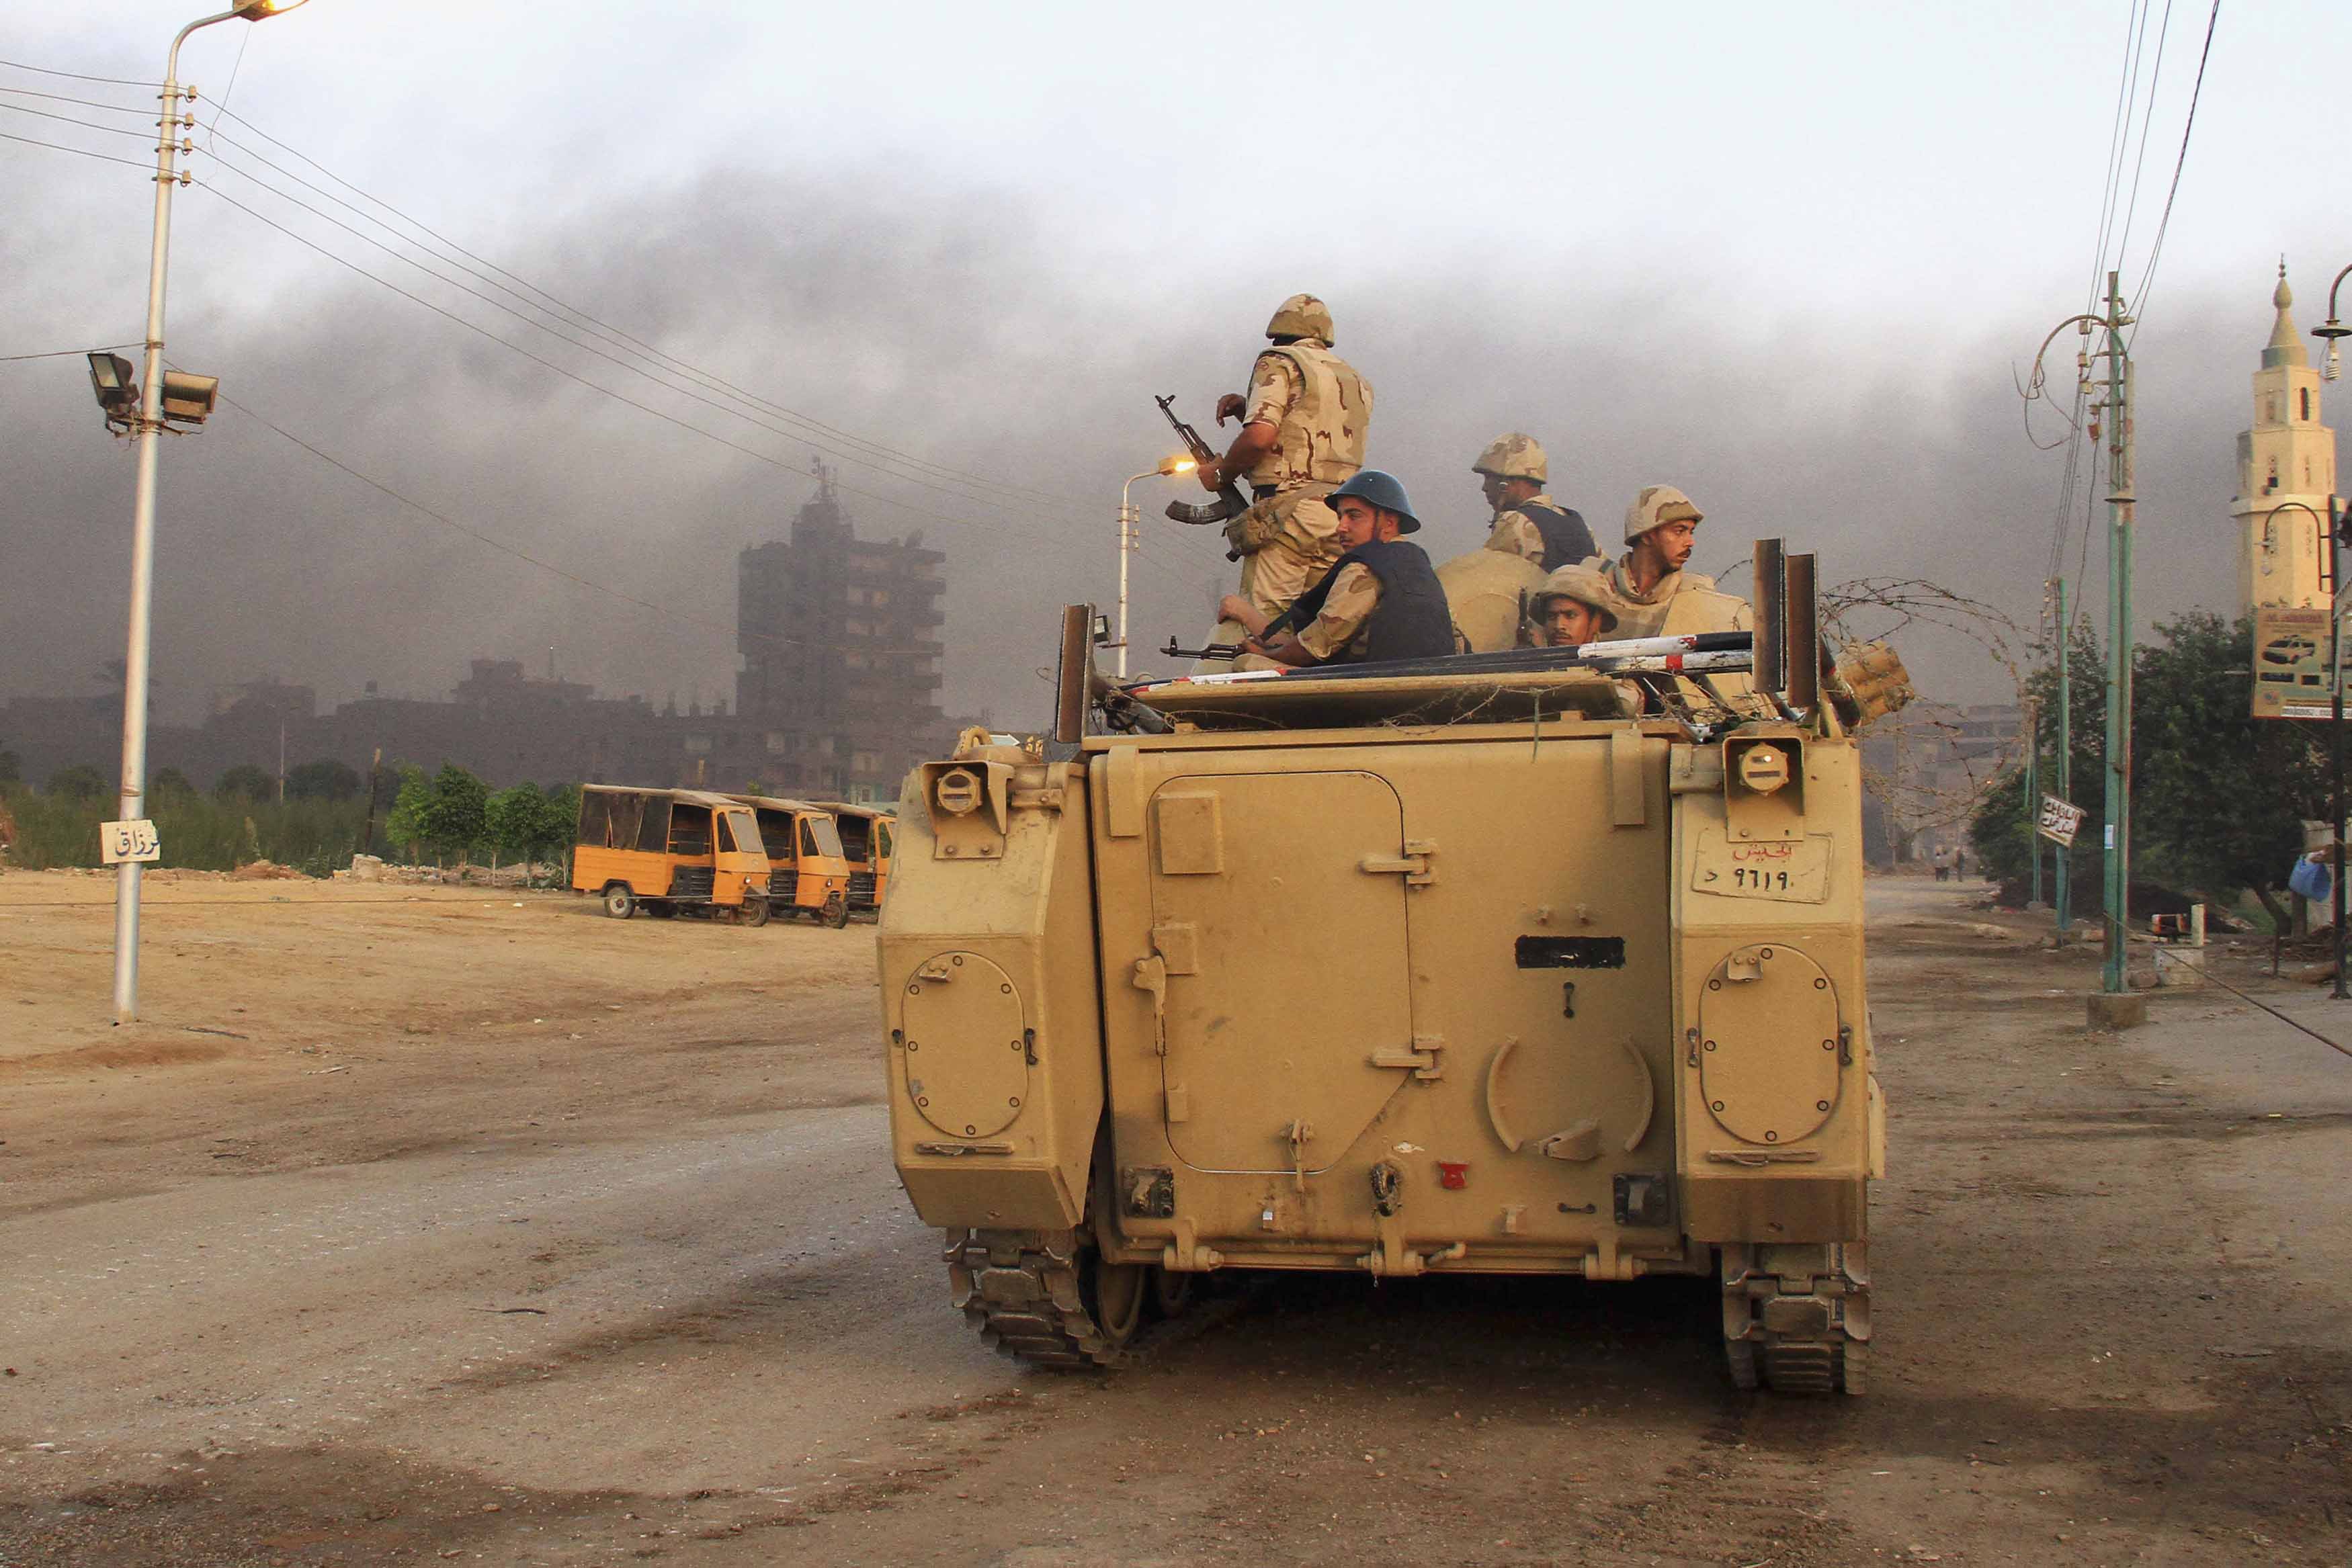 Security forces hunt militants after storming town near Cairo